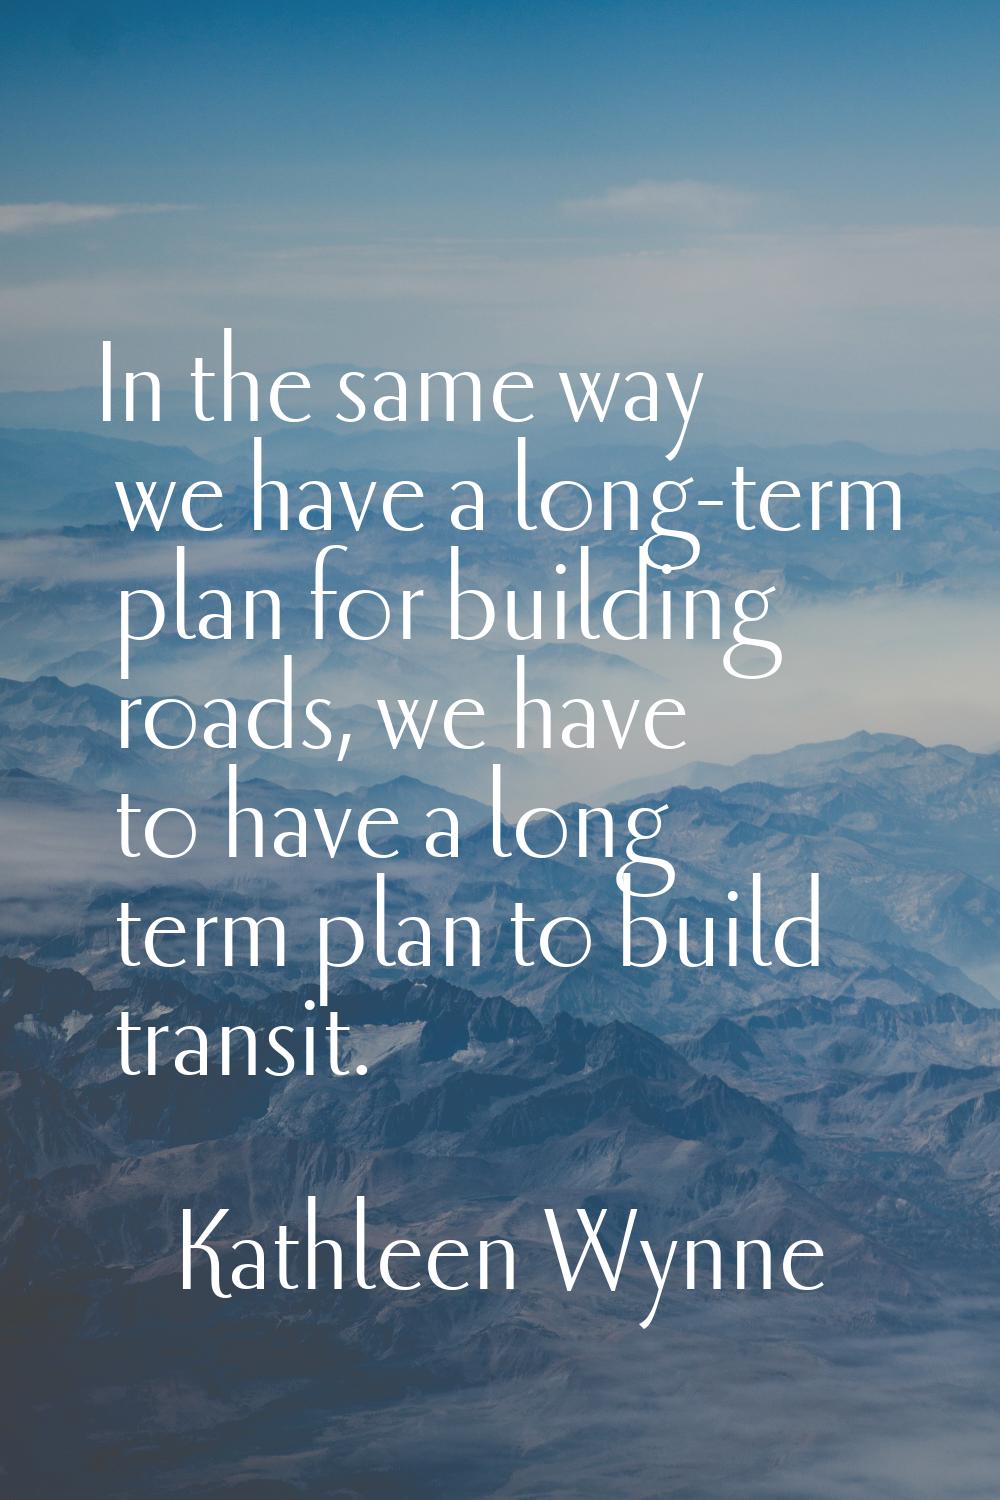 In the same way we have a long-term plan for building roads, we have to have a long term plan to bu